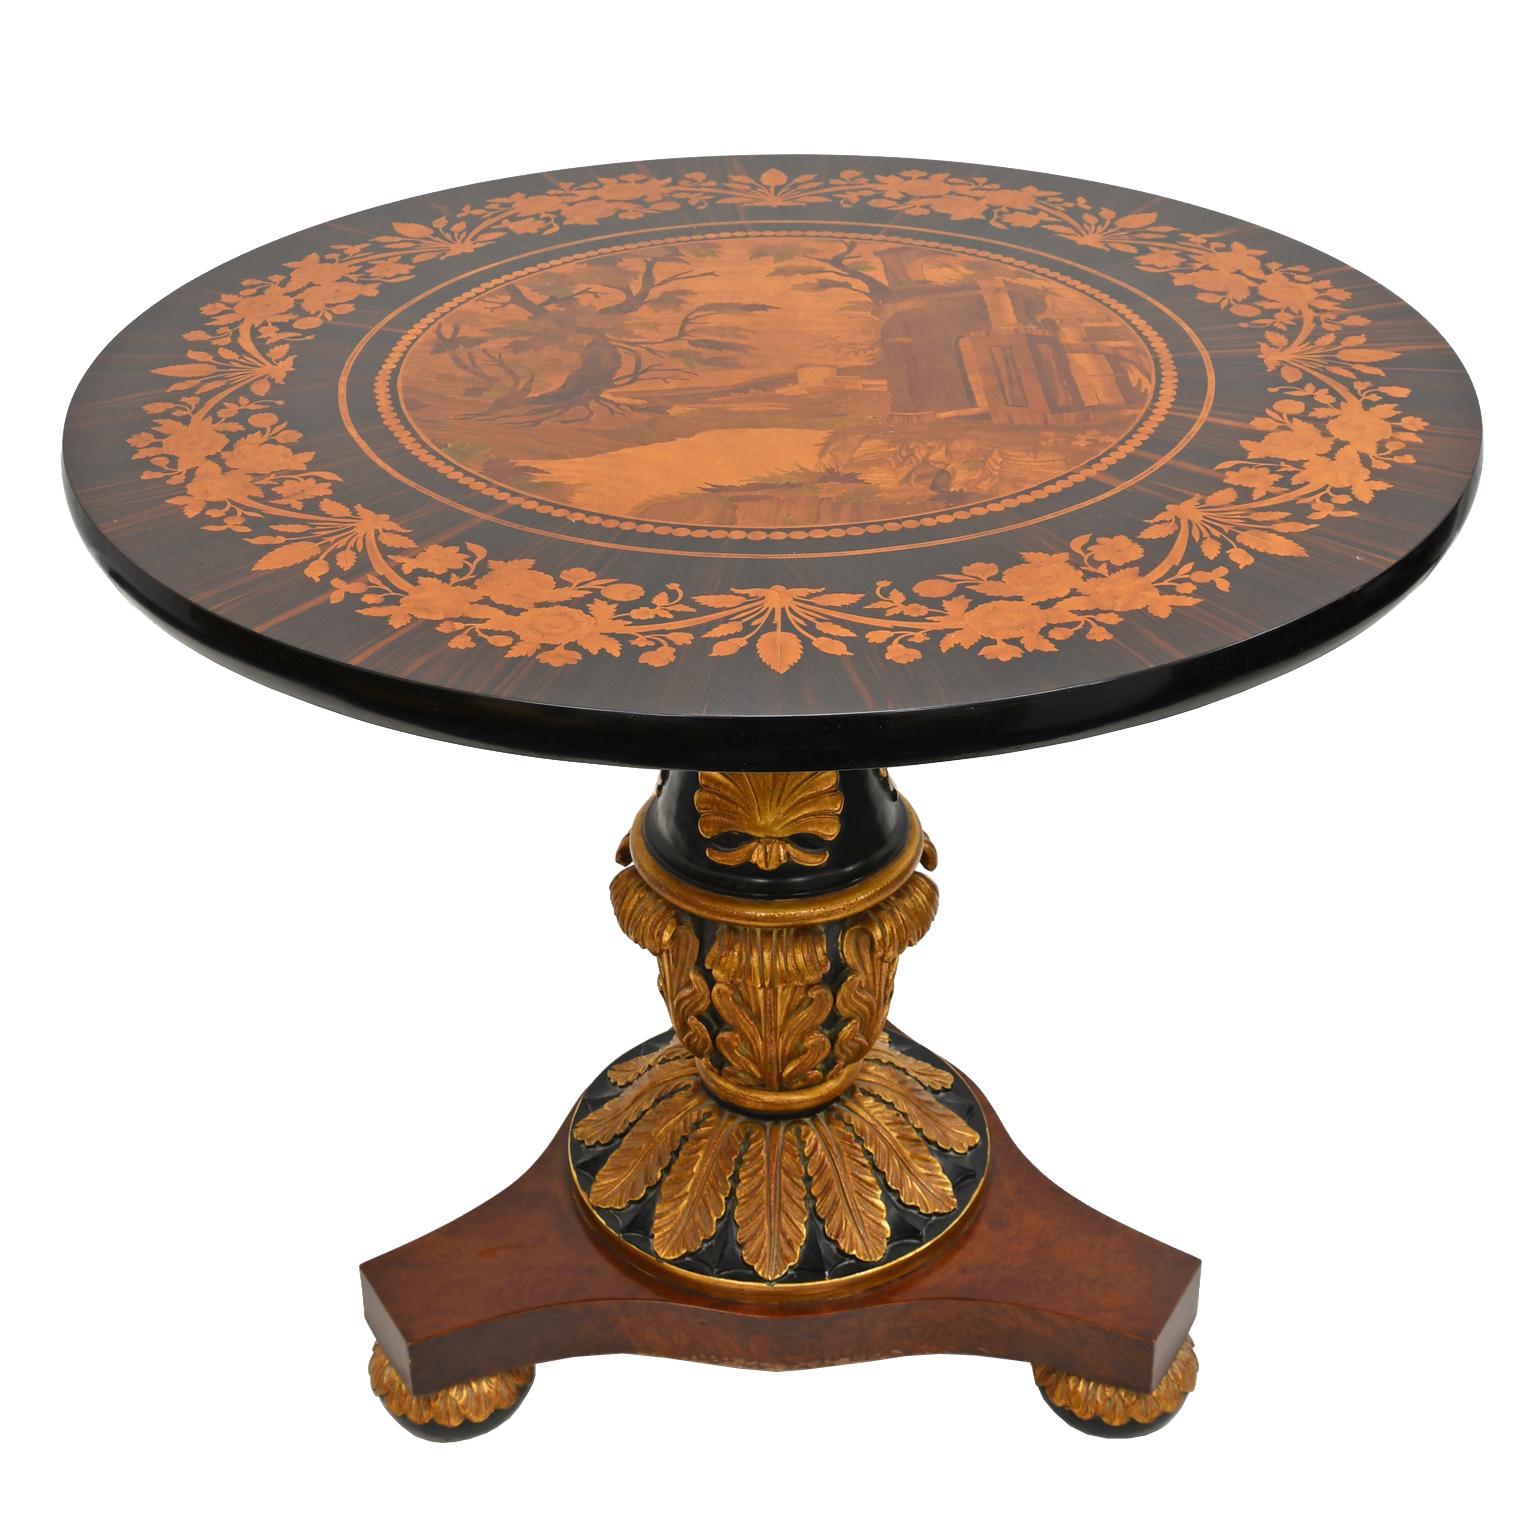 A fine reproduction Italian neoclassical table with ebonized round top with rosewood banding embellished with marquetry inlays in various woods of floral & foliate design along border & a landscape scene in the center panel that includes large